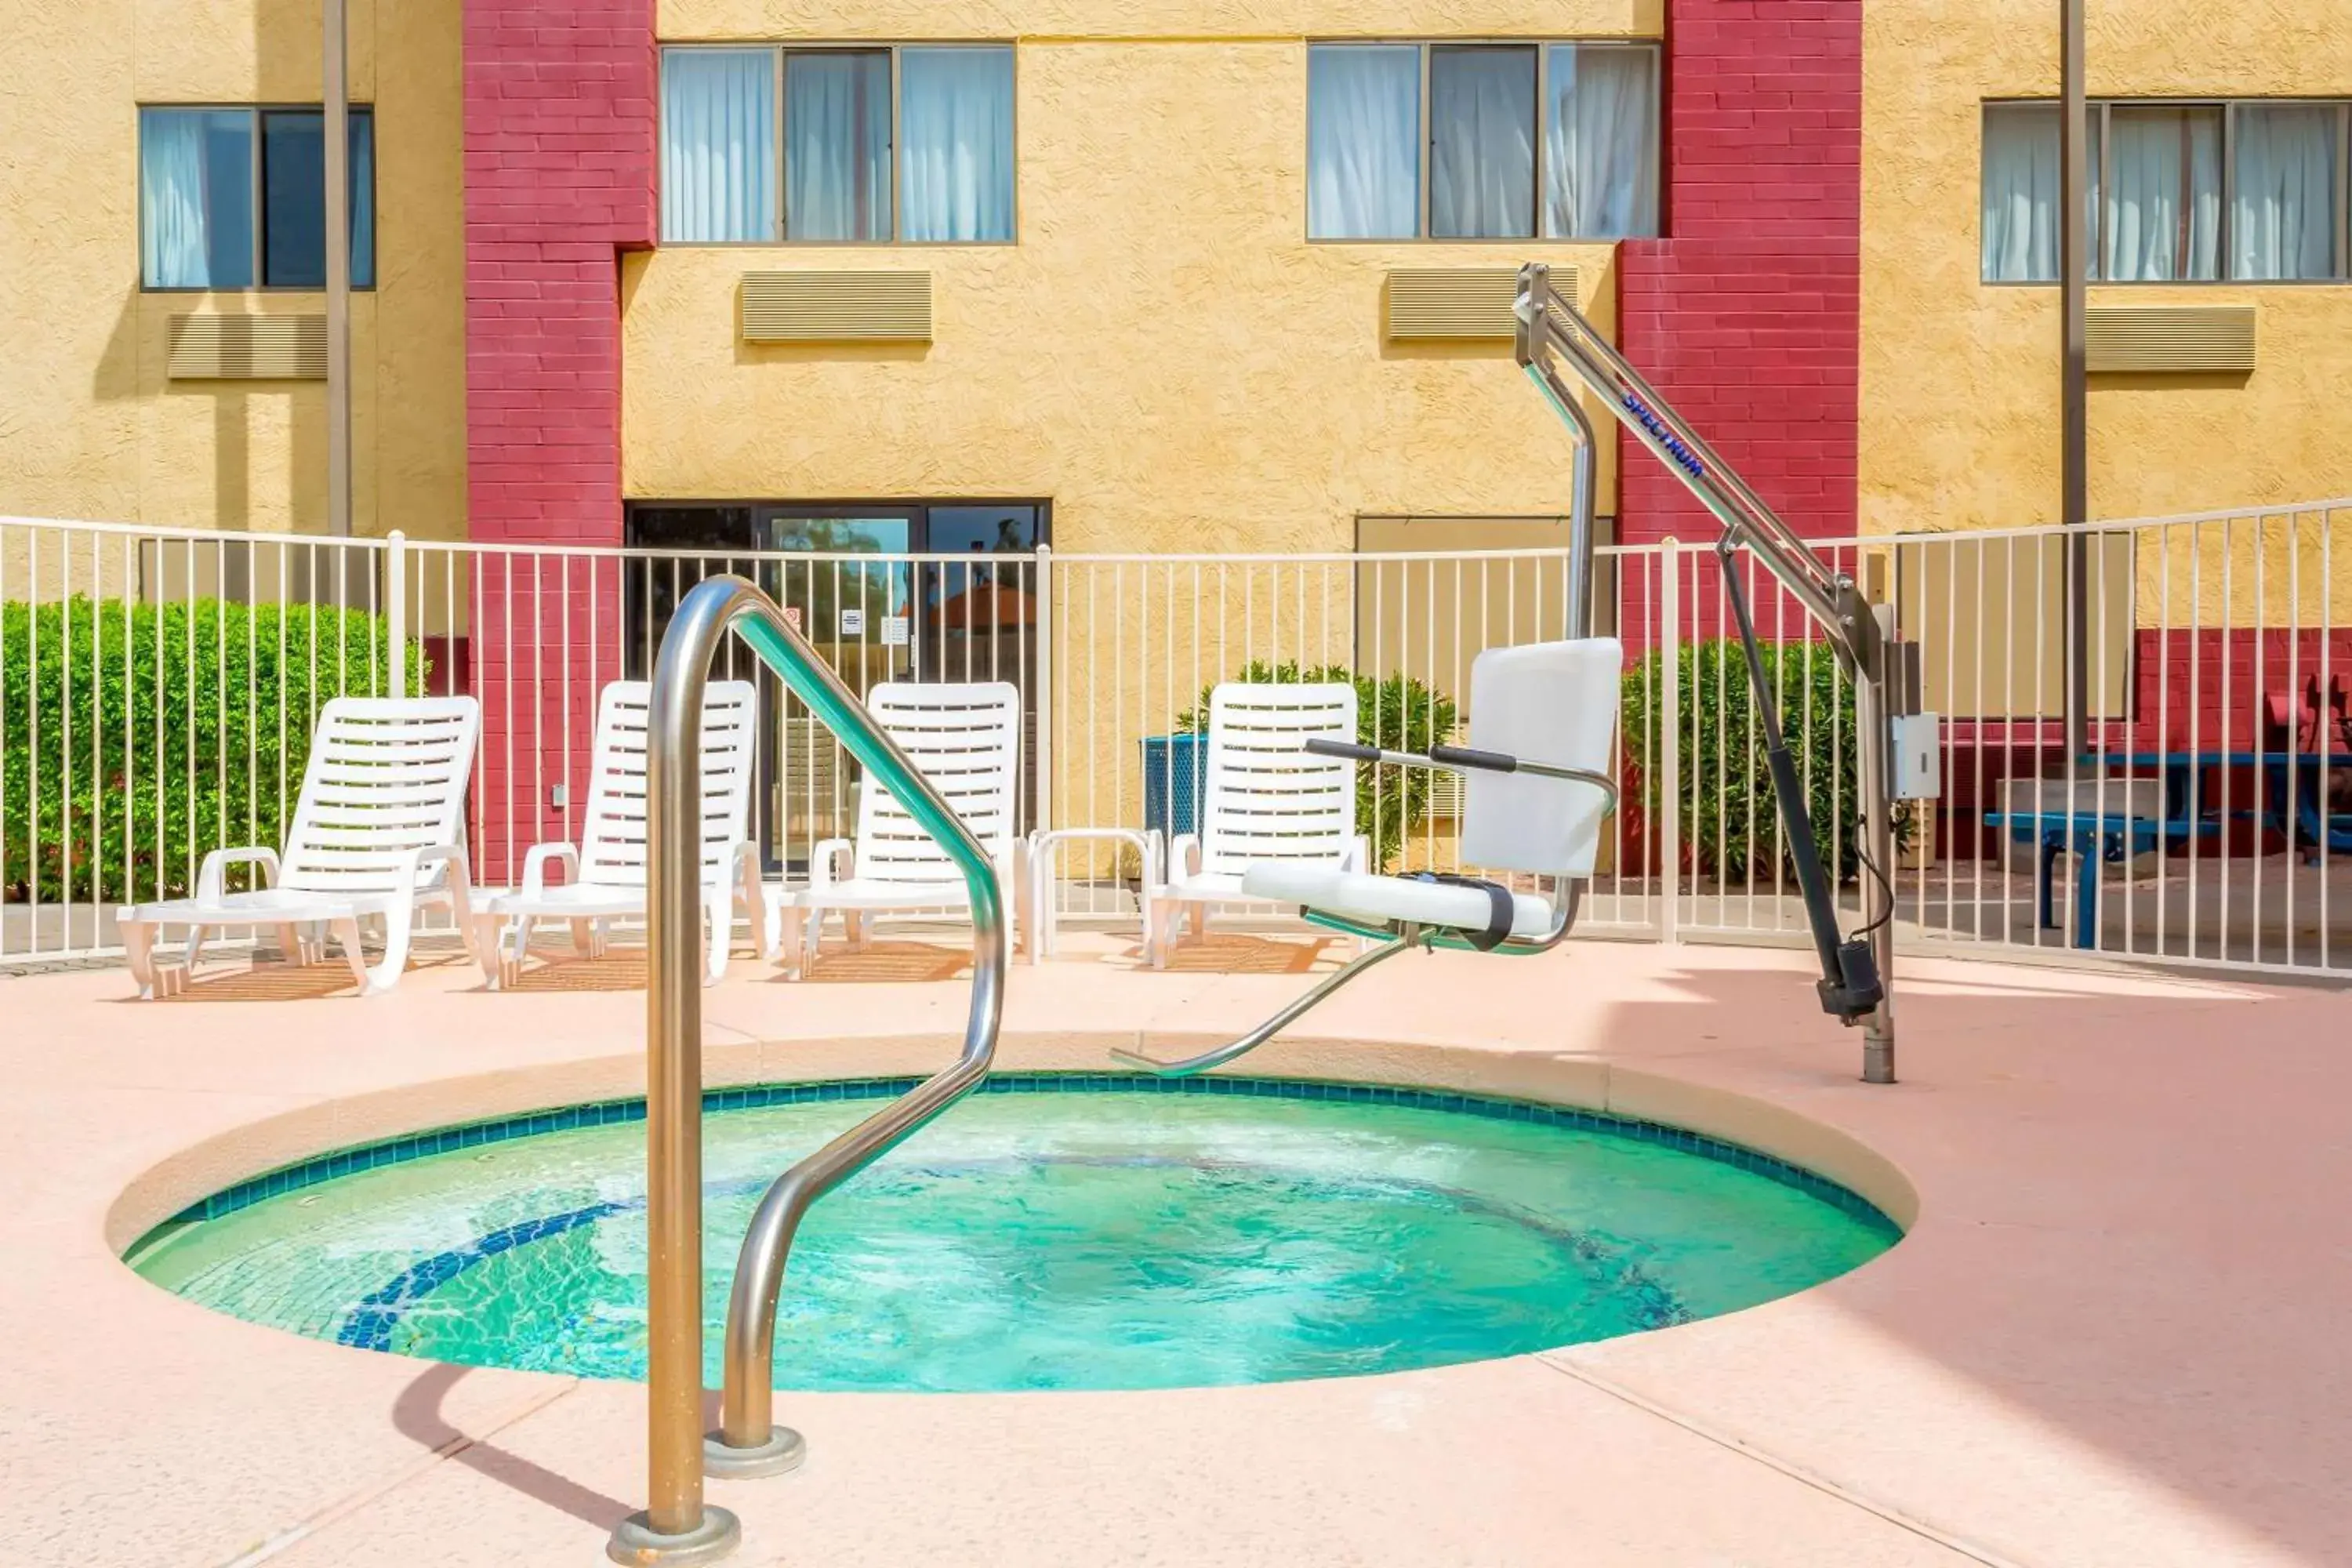 On site, Swimming Pool in Super 8 by Wyndham - Mesa/Gilbert